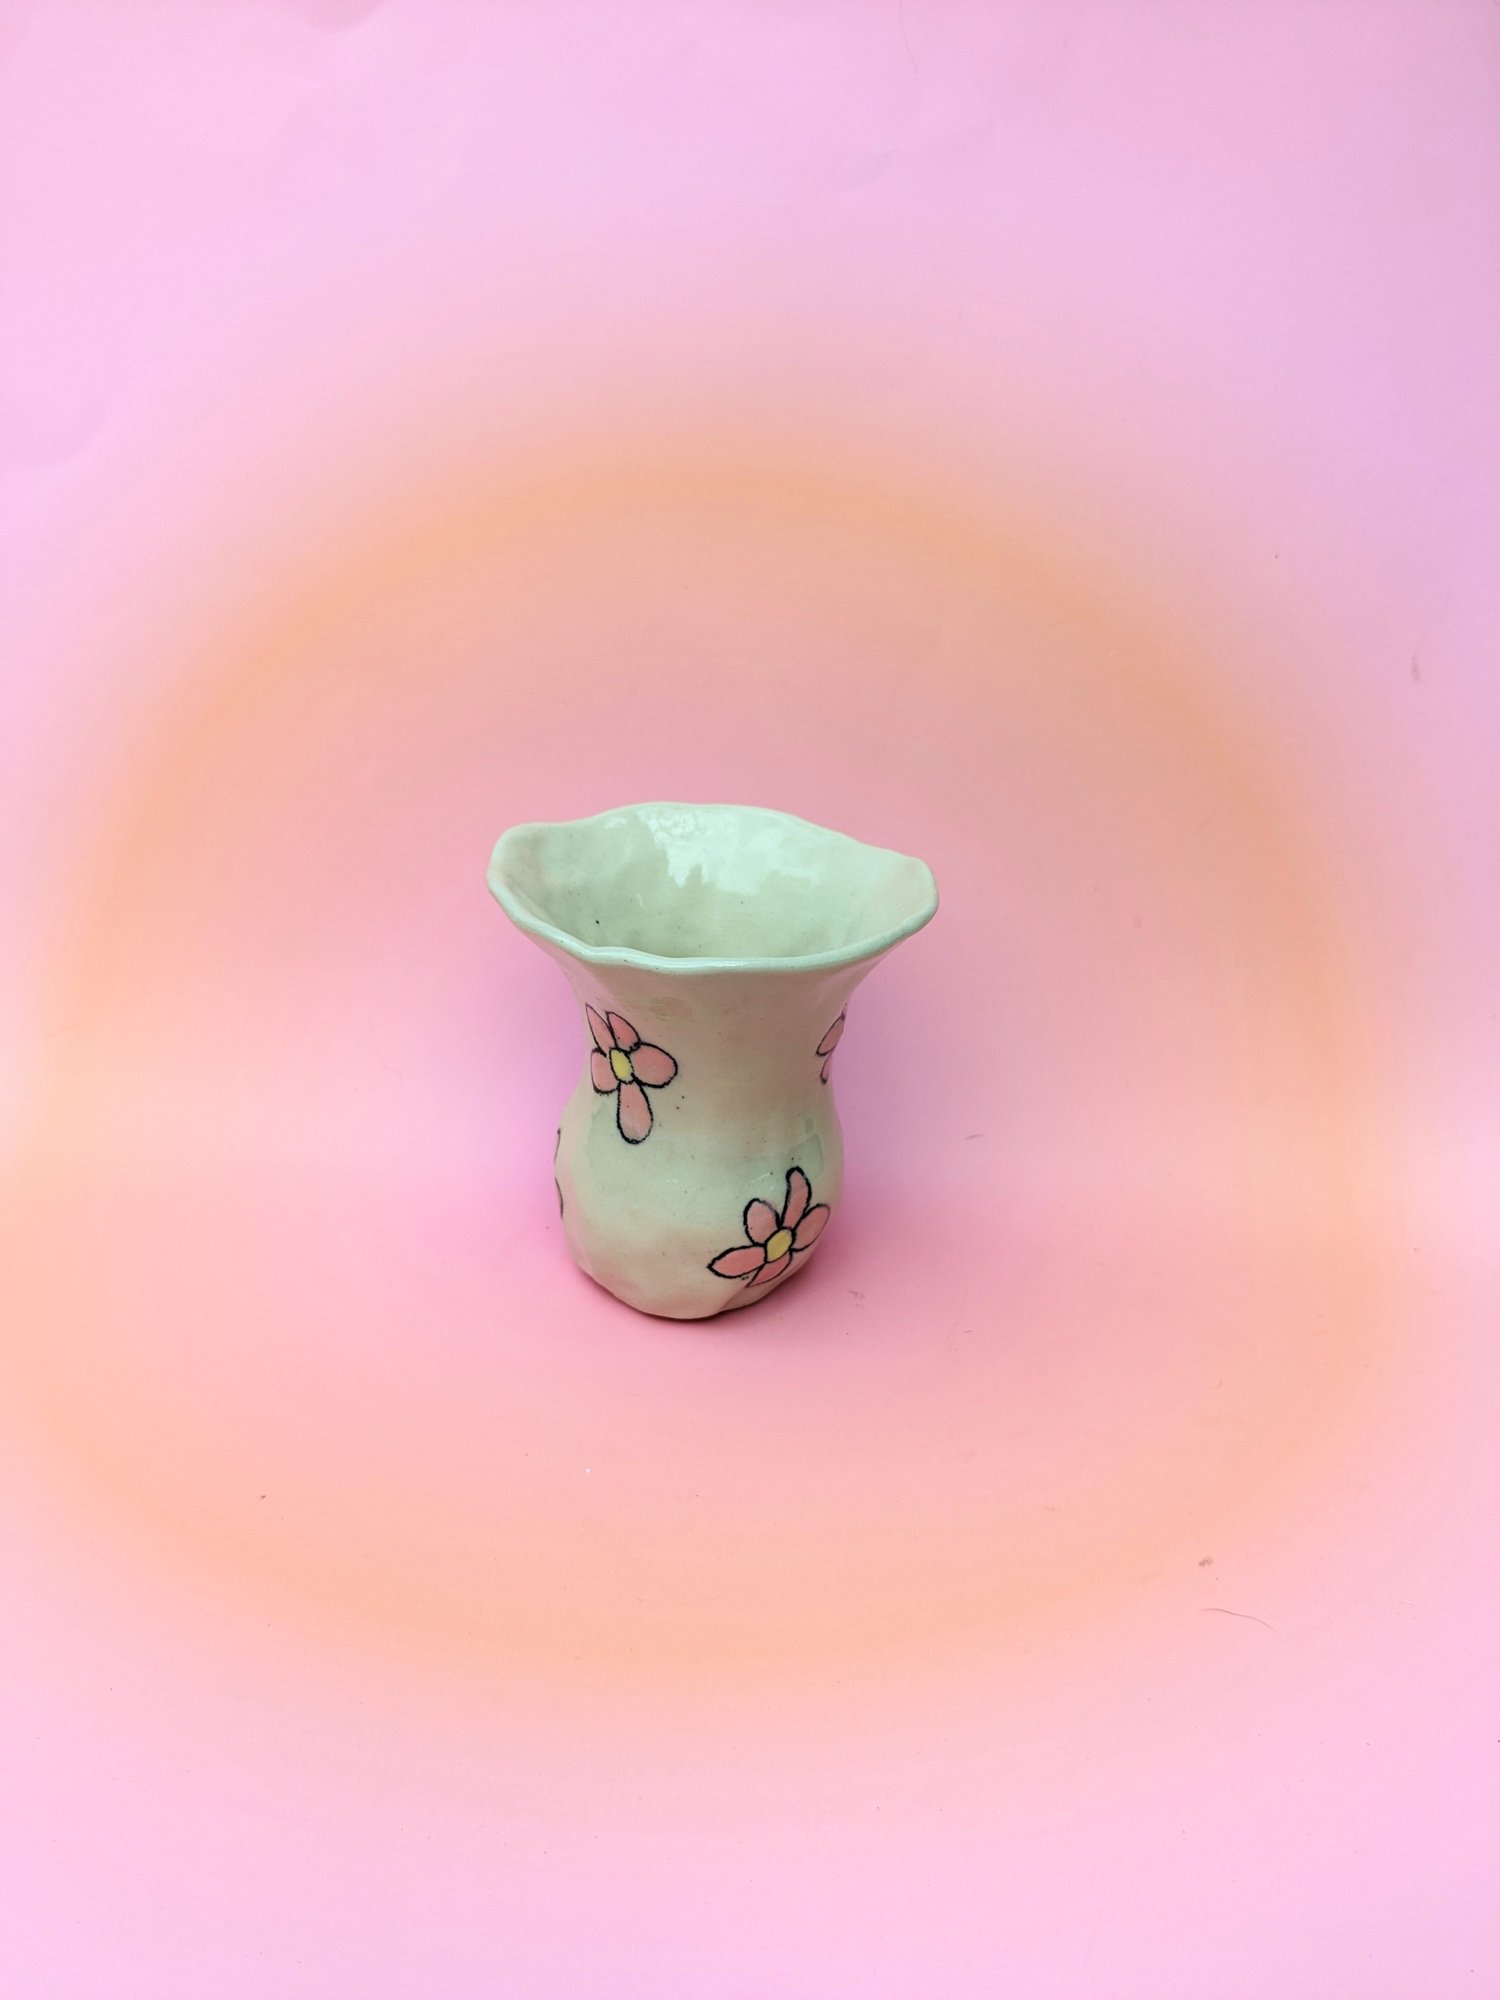 Image of pink and yellow daisy vase